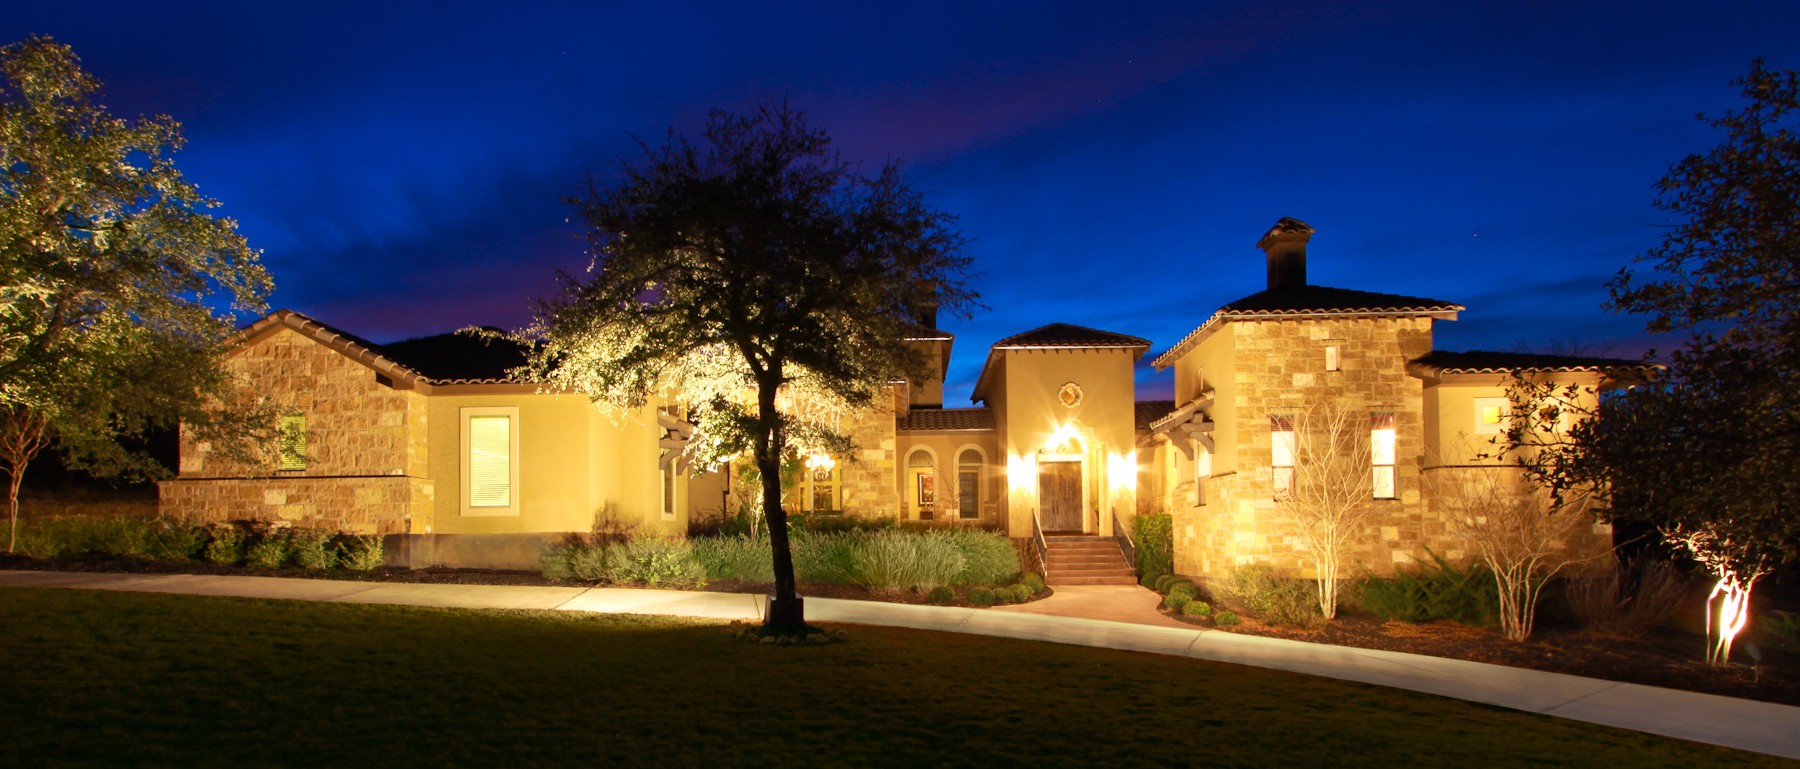 Luxury Homes for sale in Texas Hill Country | The Boehm Team